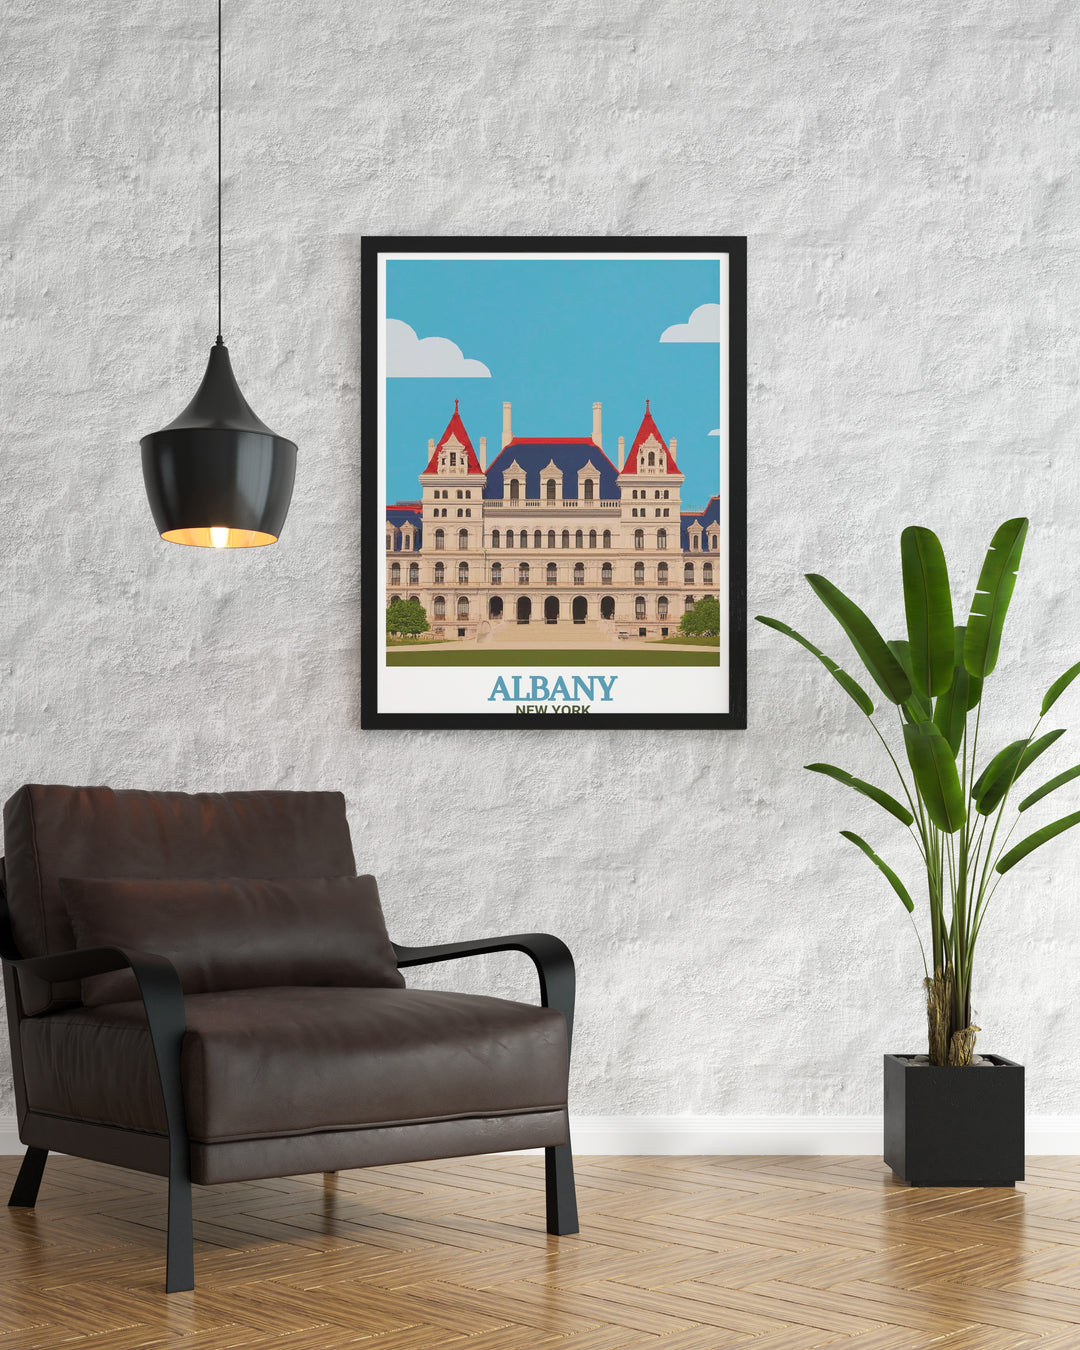 Captivating New York State Capitol modern art highlighting the beauty of Albanys landmarks an ideal piece for art and collectibles lovers who want to bring a piece of New York State decor into their homes and offices with striking visual impact.